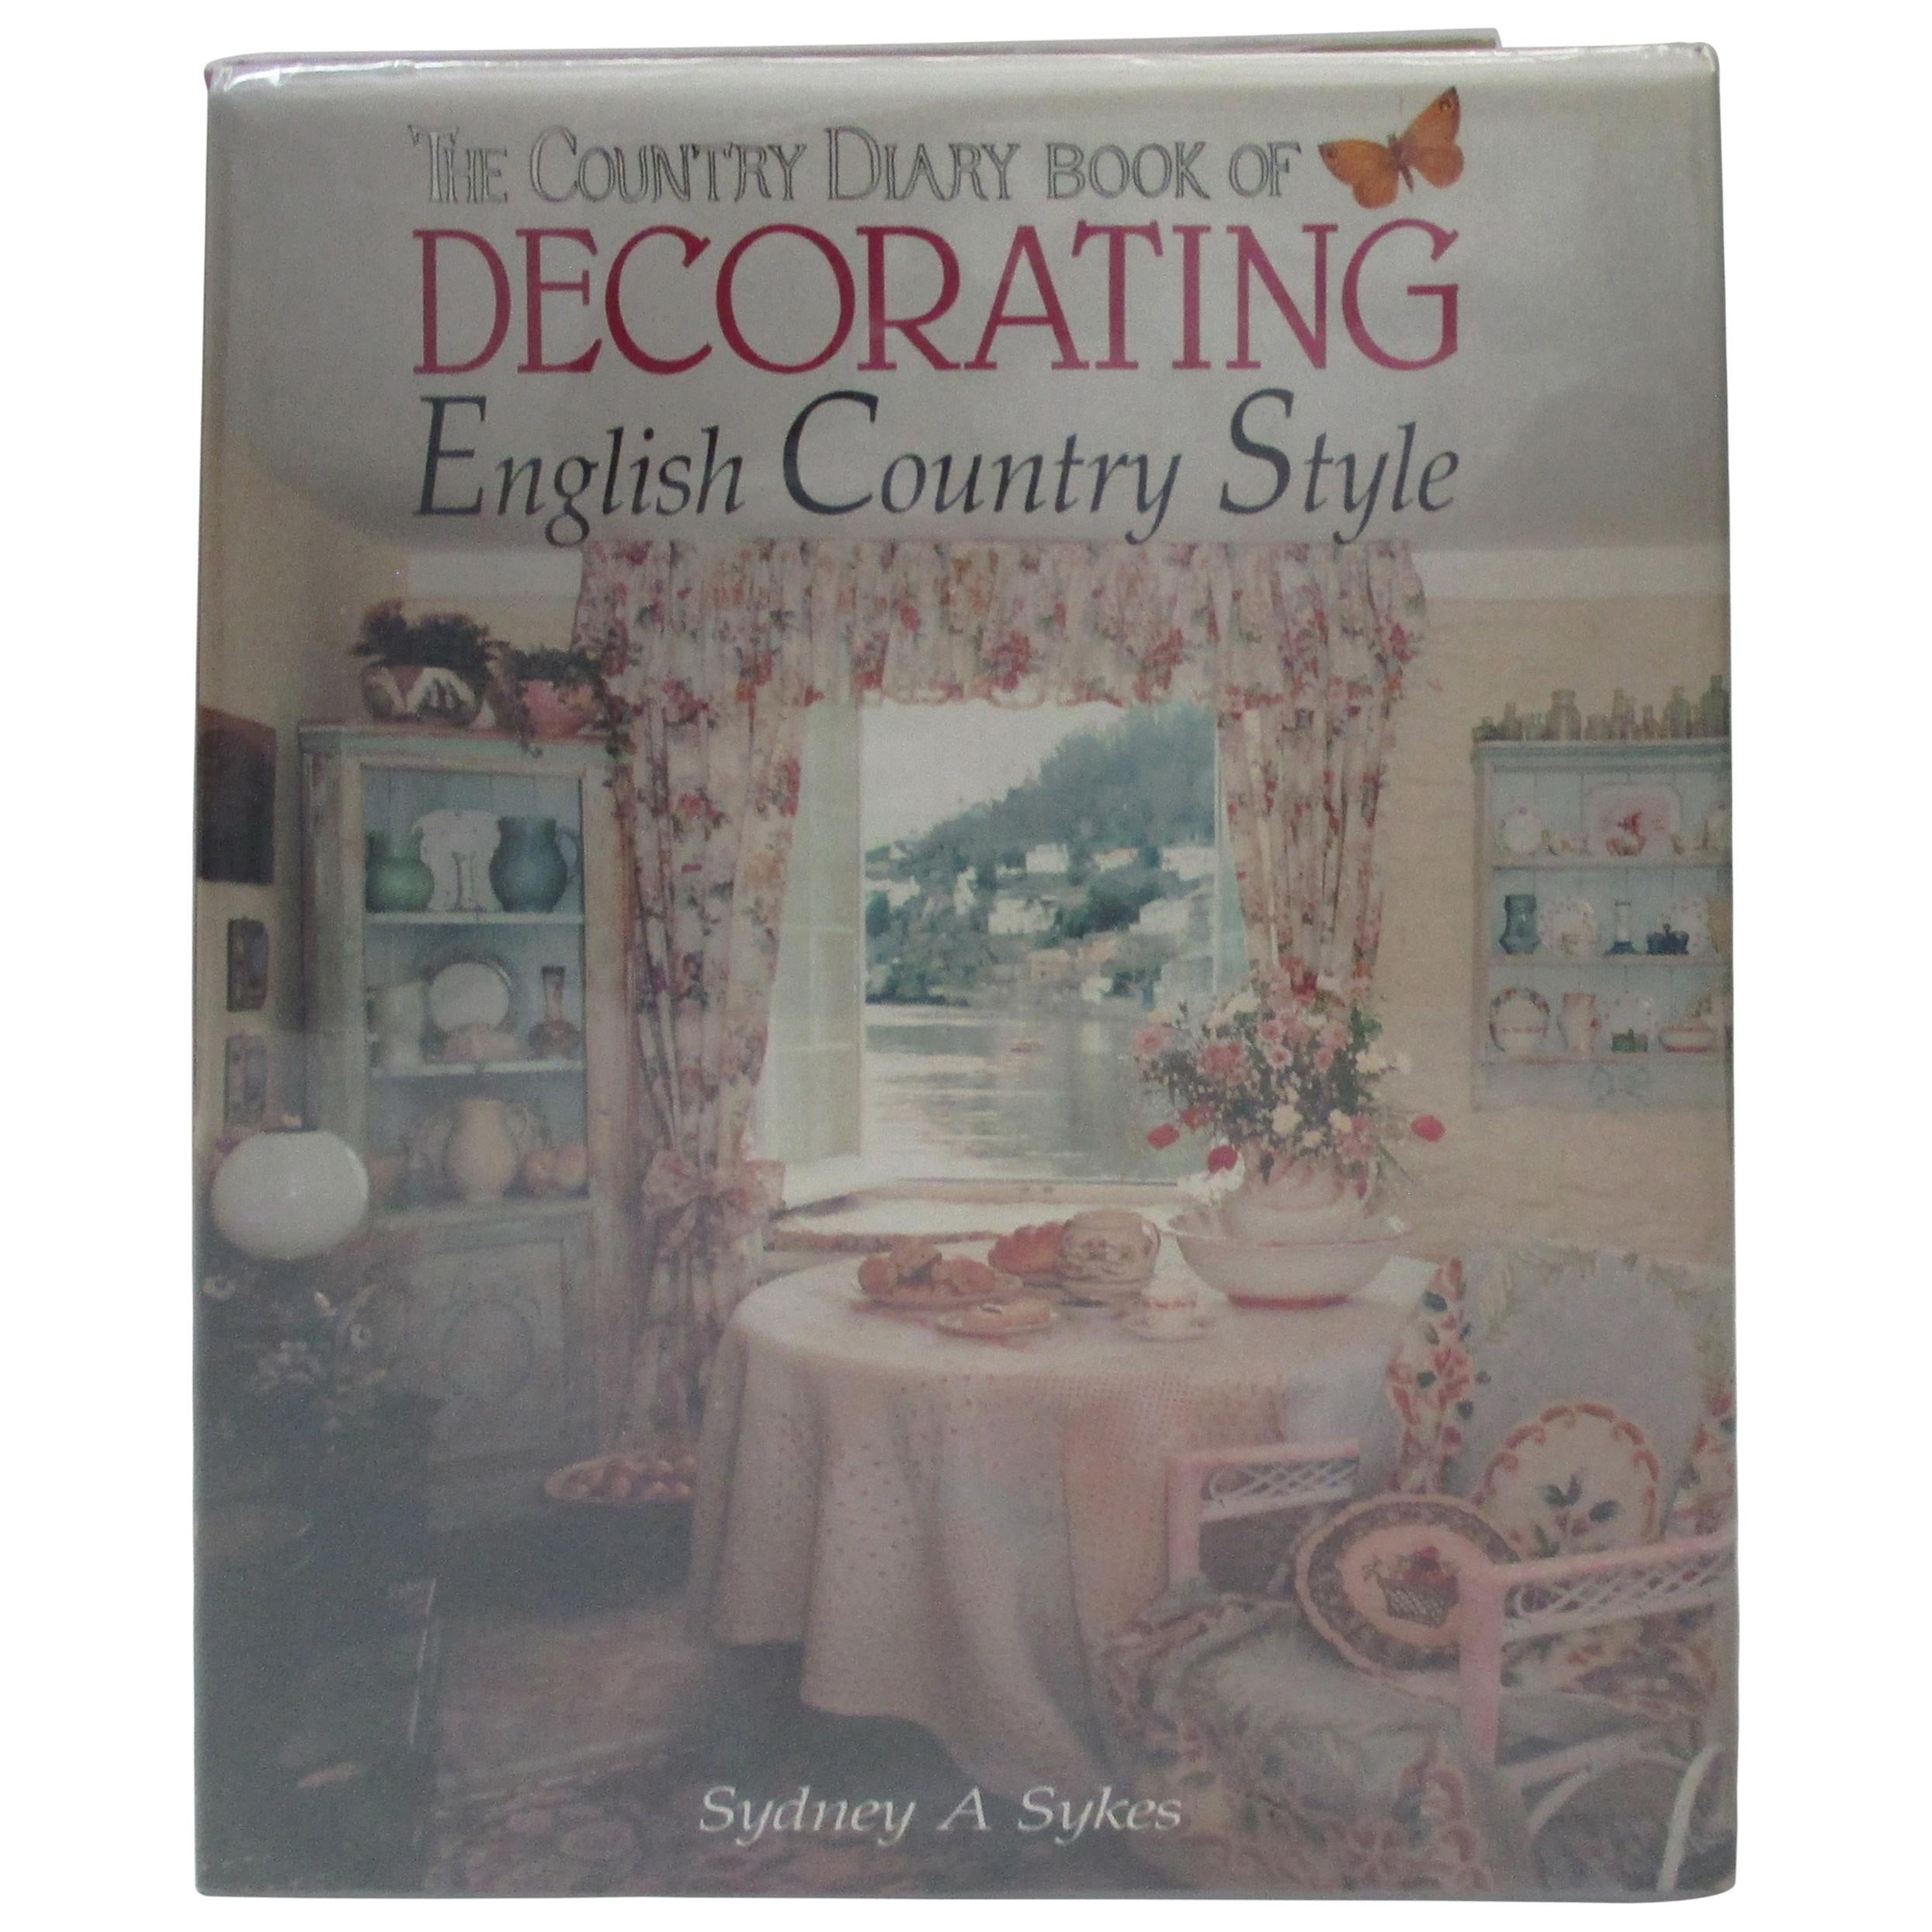 The Country Diary Book of Decorating English Country Style